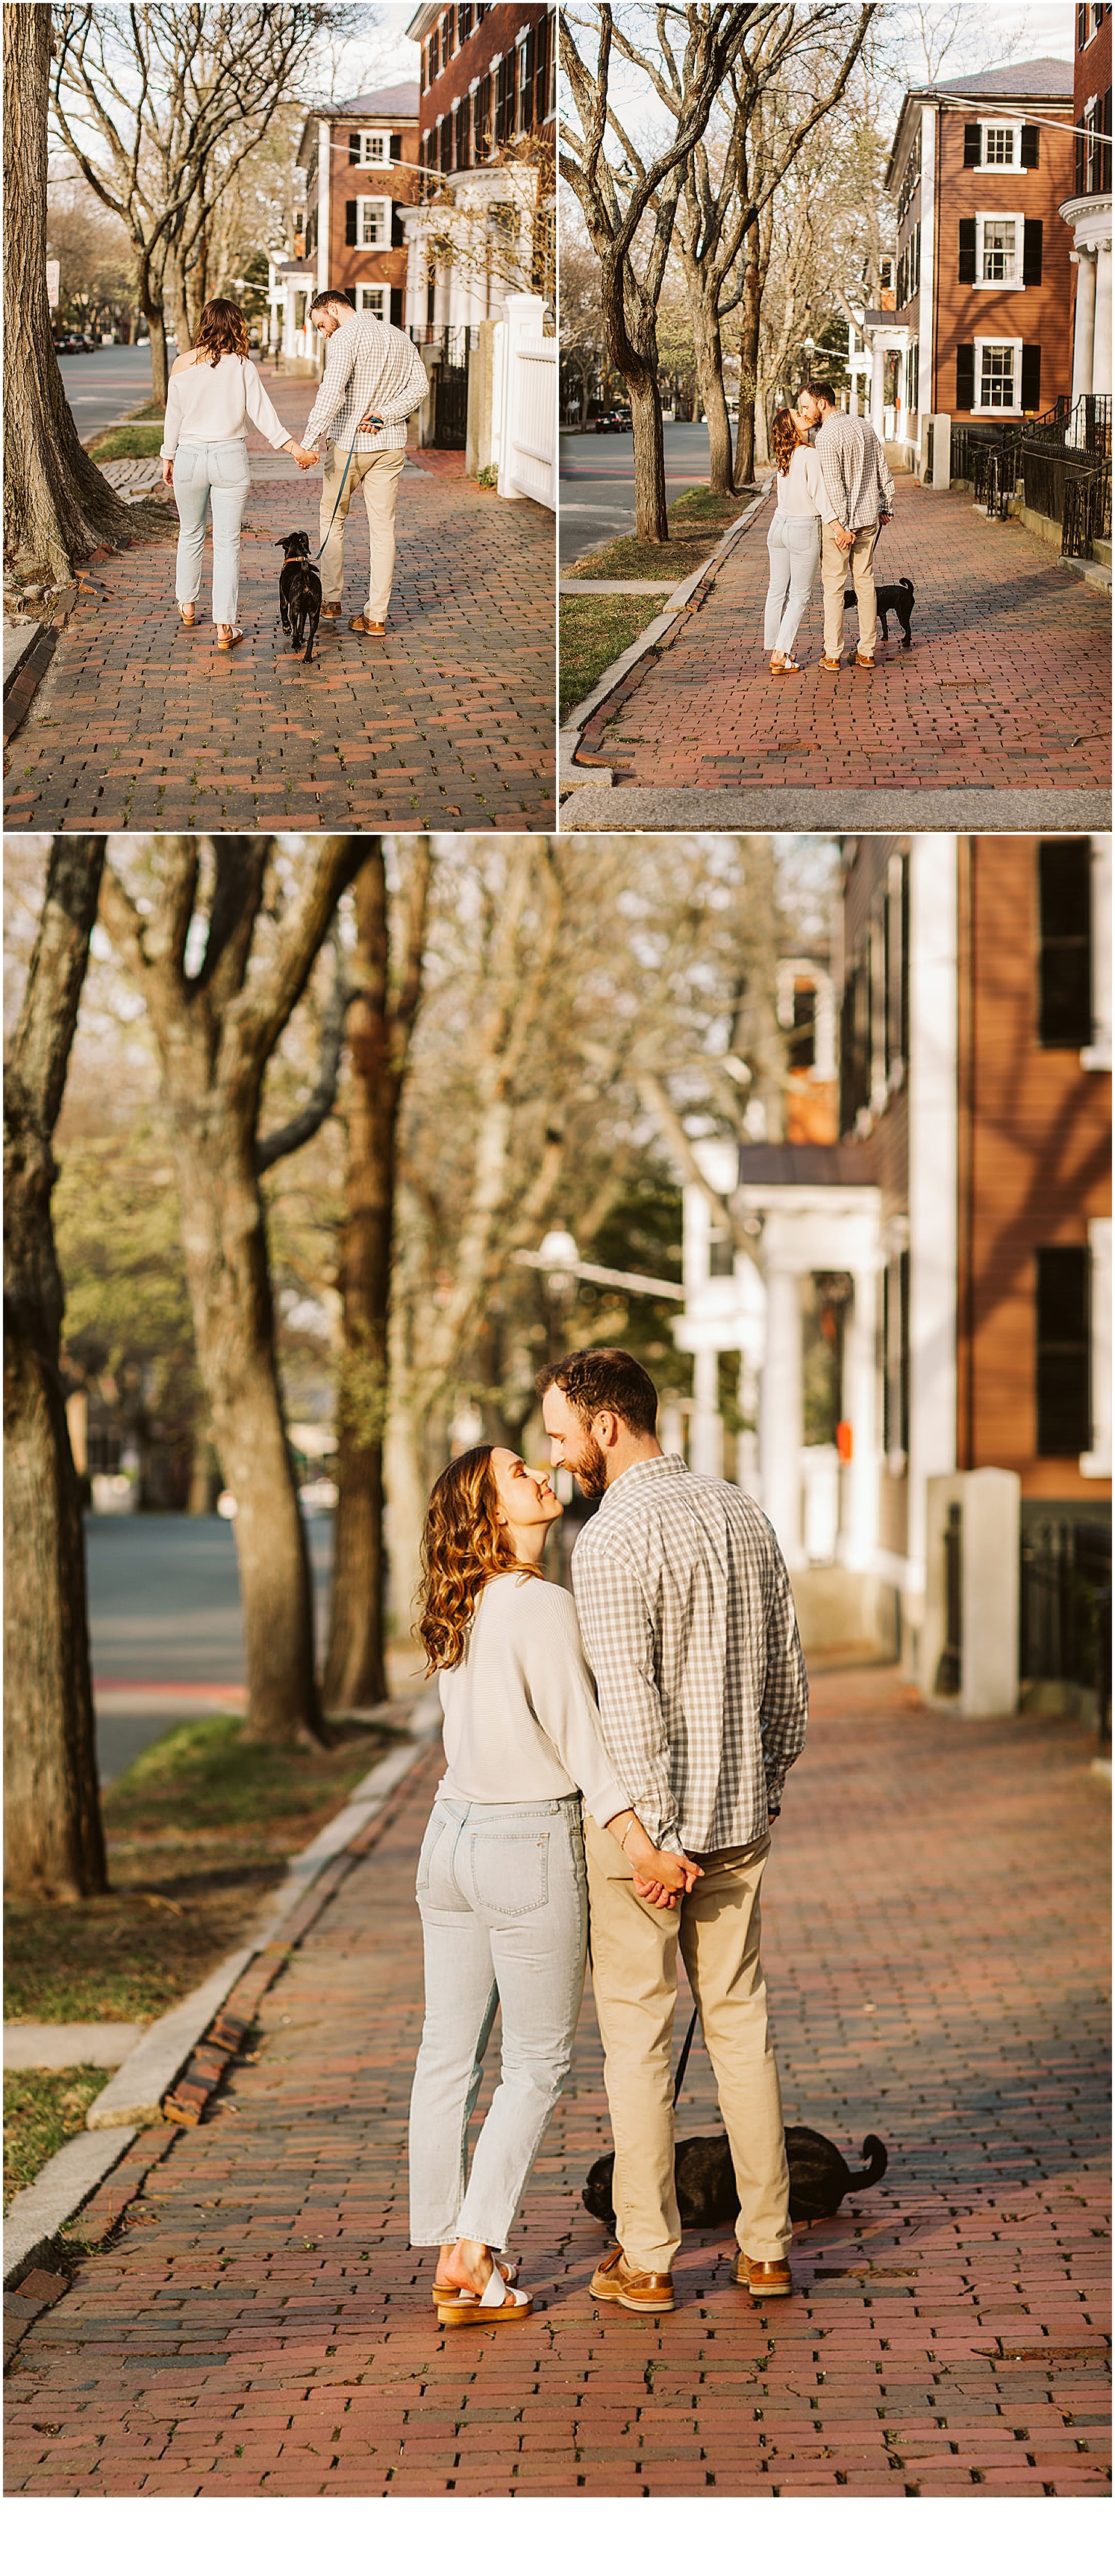 Engagement photos in Downtown Salem Massachusetts with dog